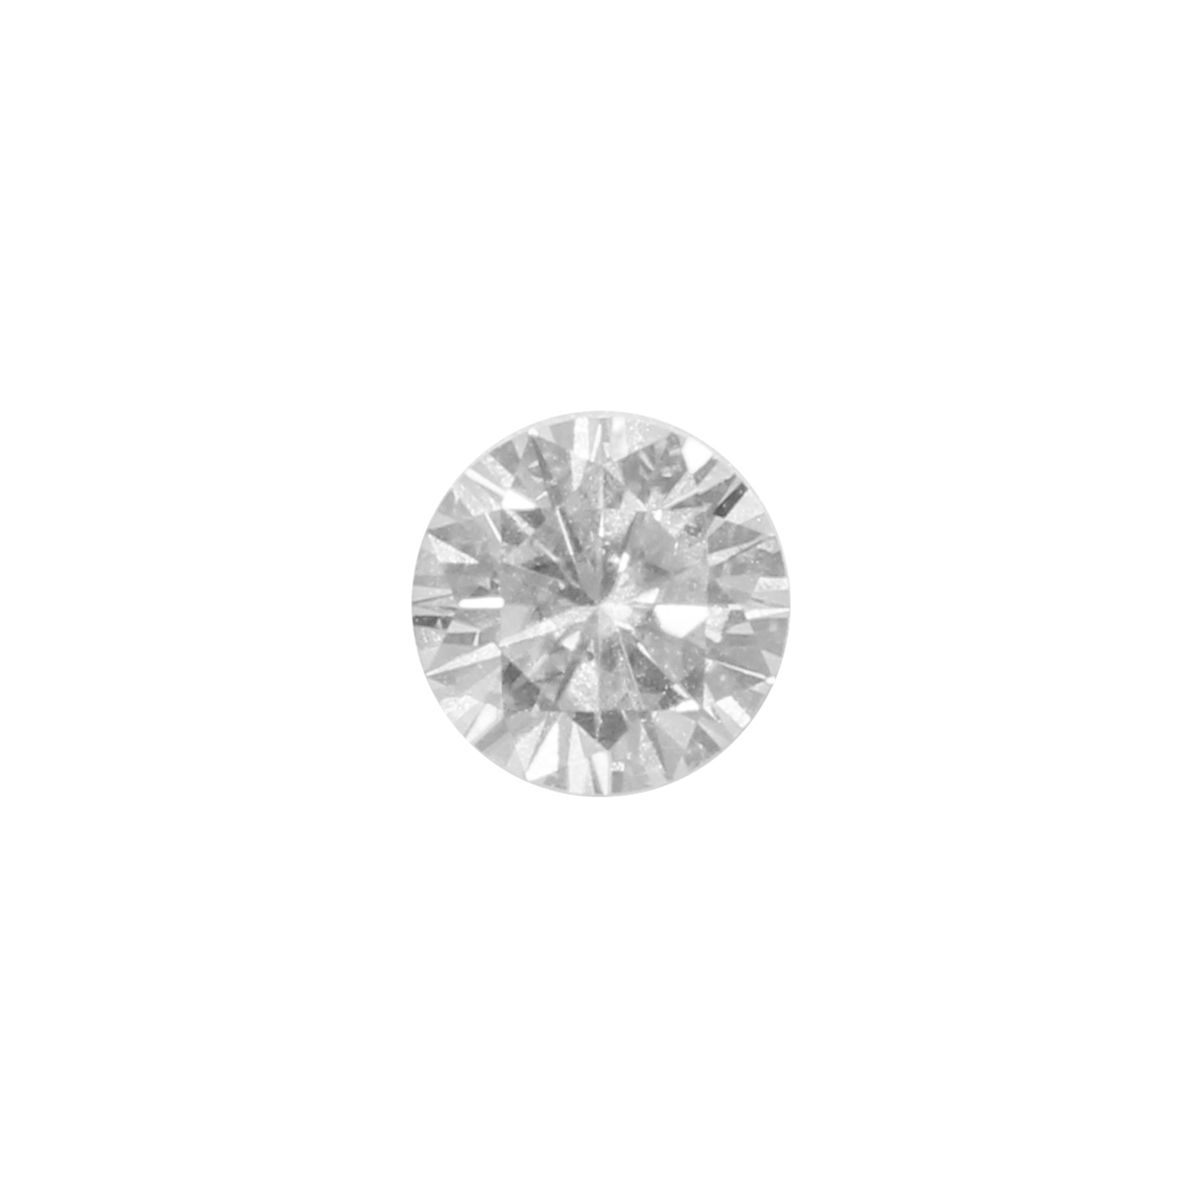 White-Moissanite-Diamond-G-Color-078cts-6mm-Round-Shape-VS2-Clarity-Wedding-Jewelry-1459581